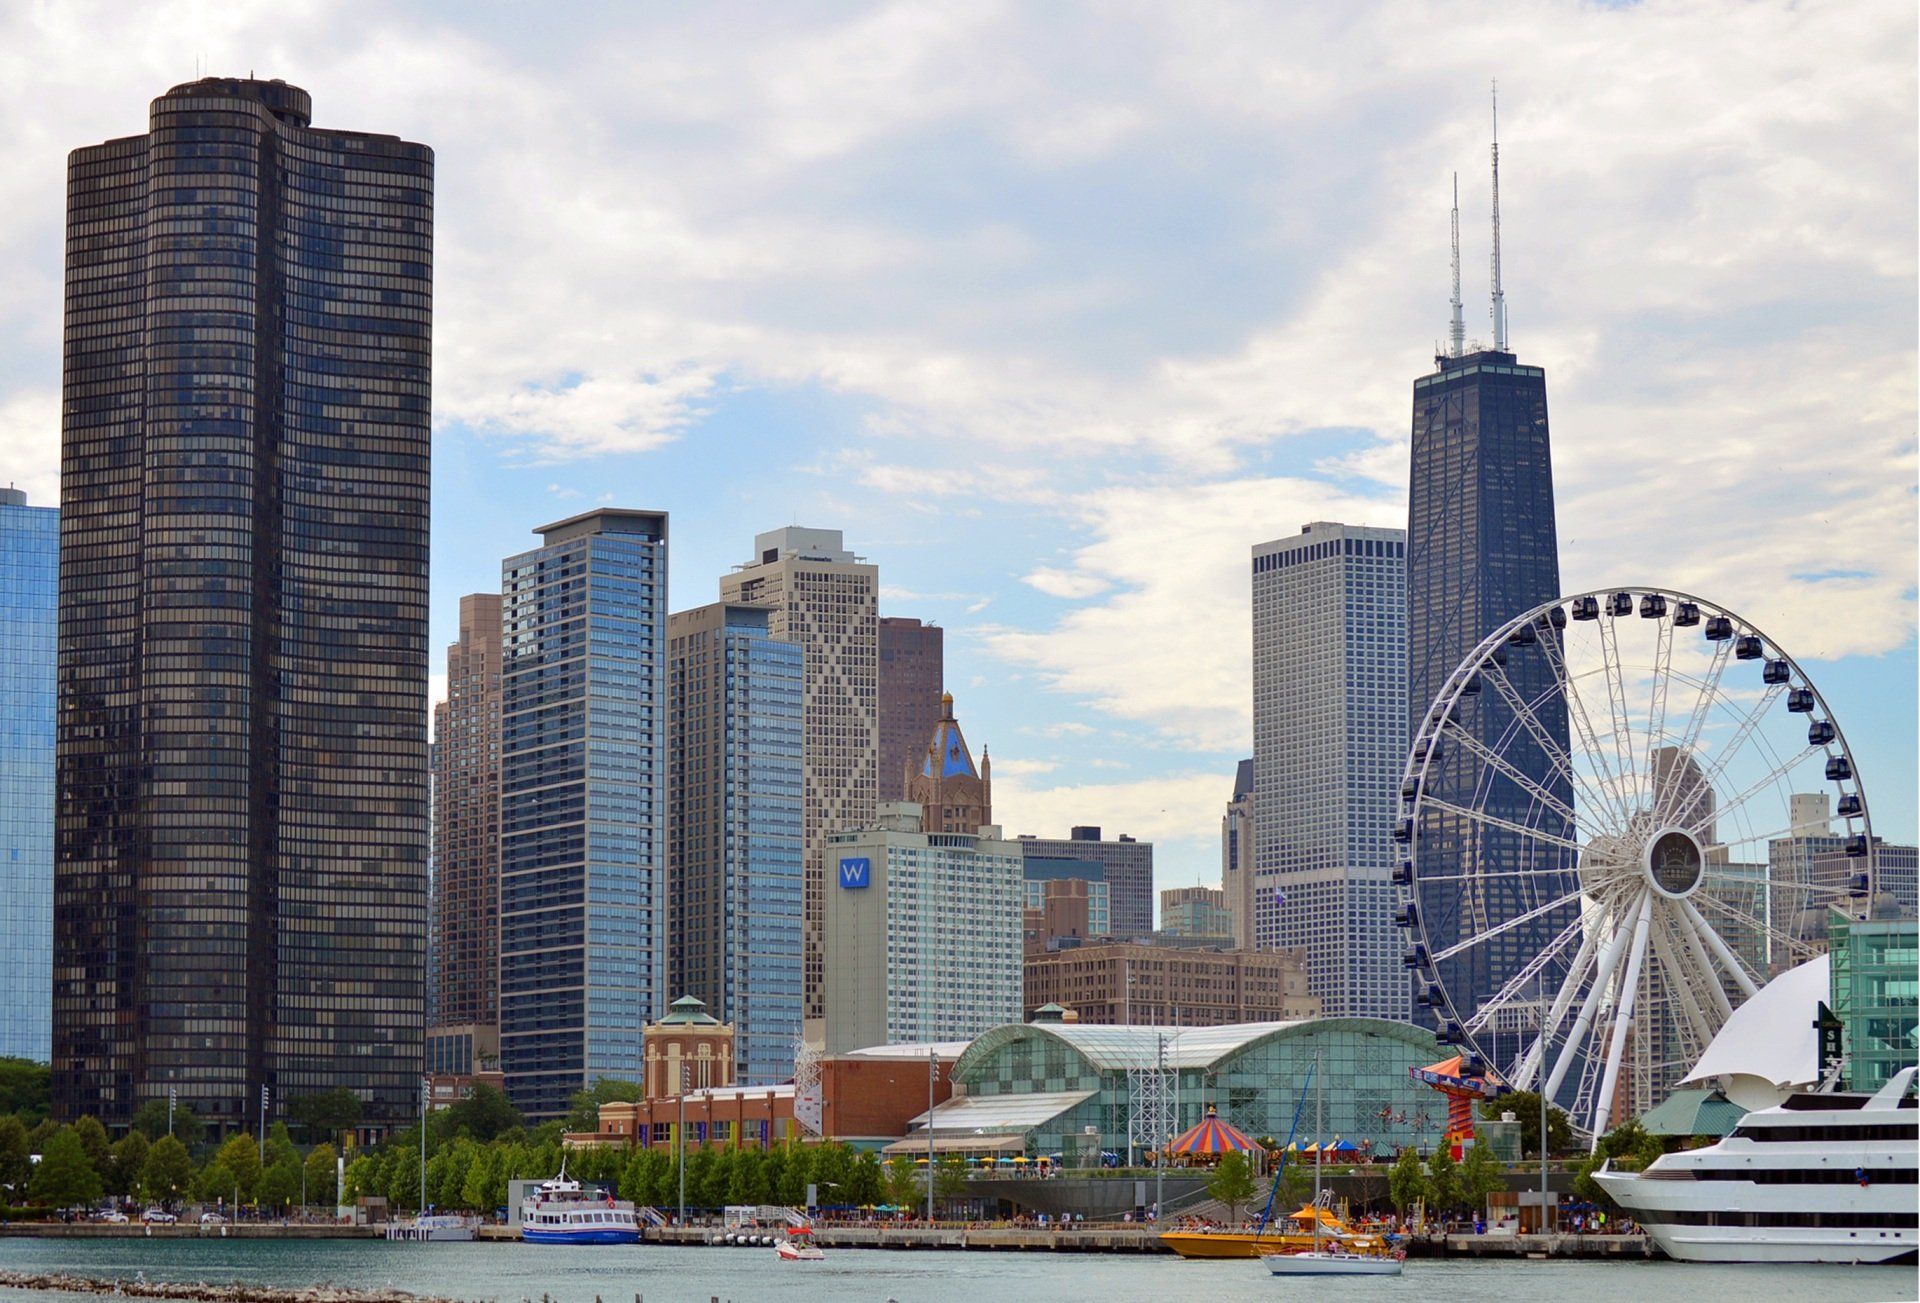 a city skyline with a ferris wheel in the foreground